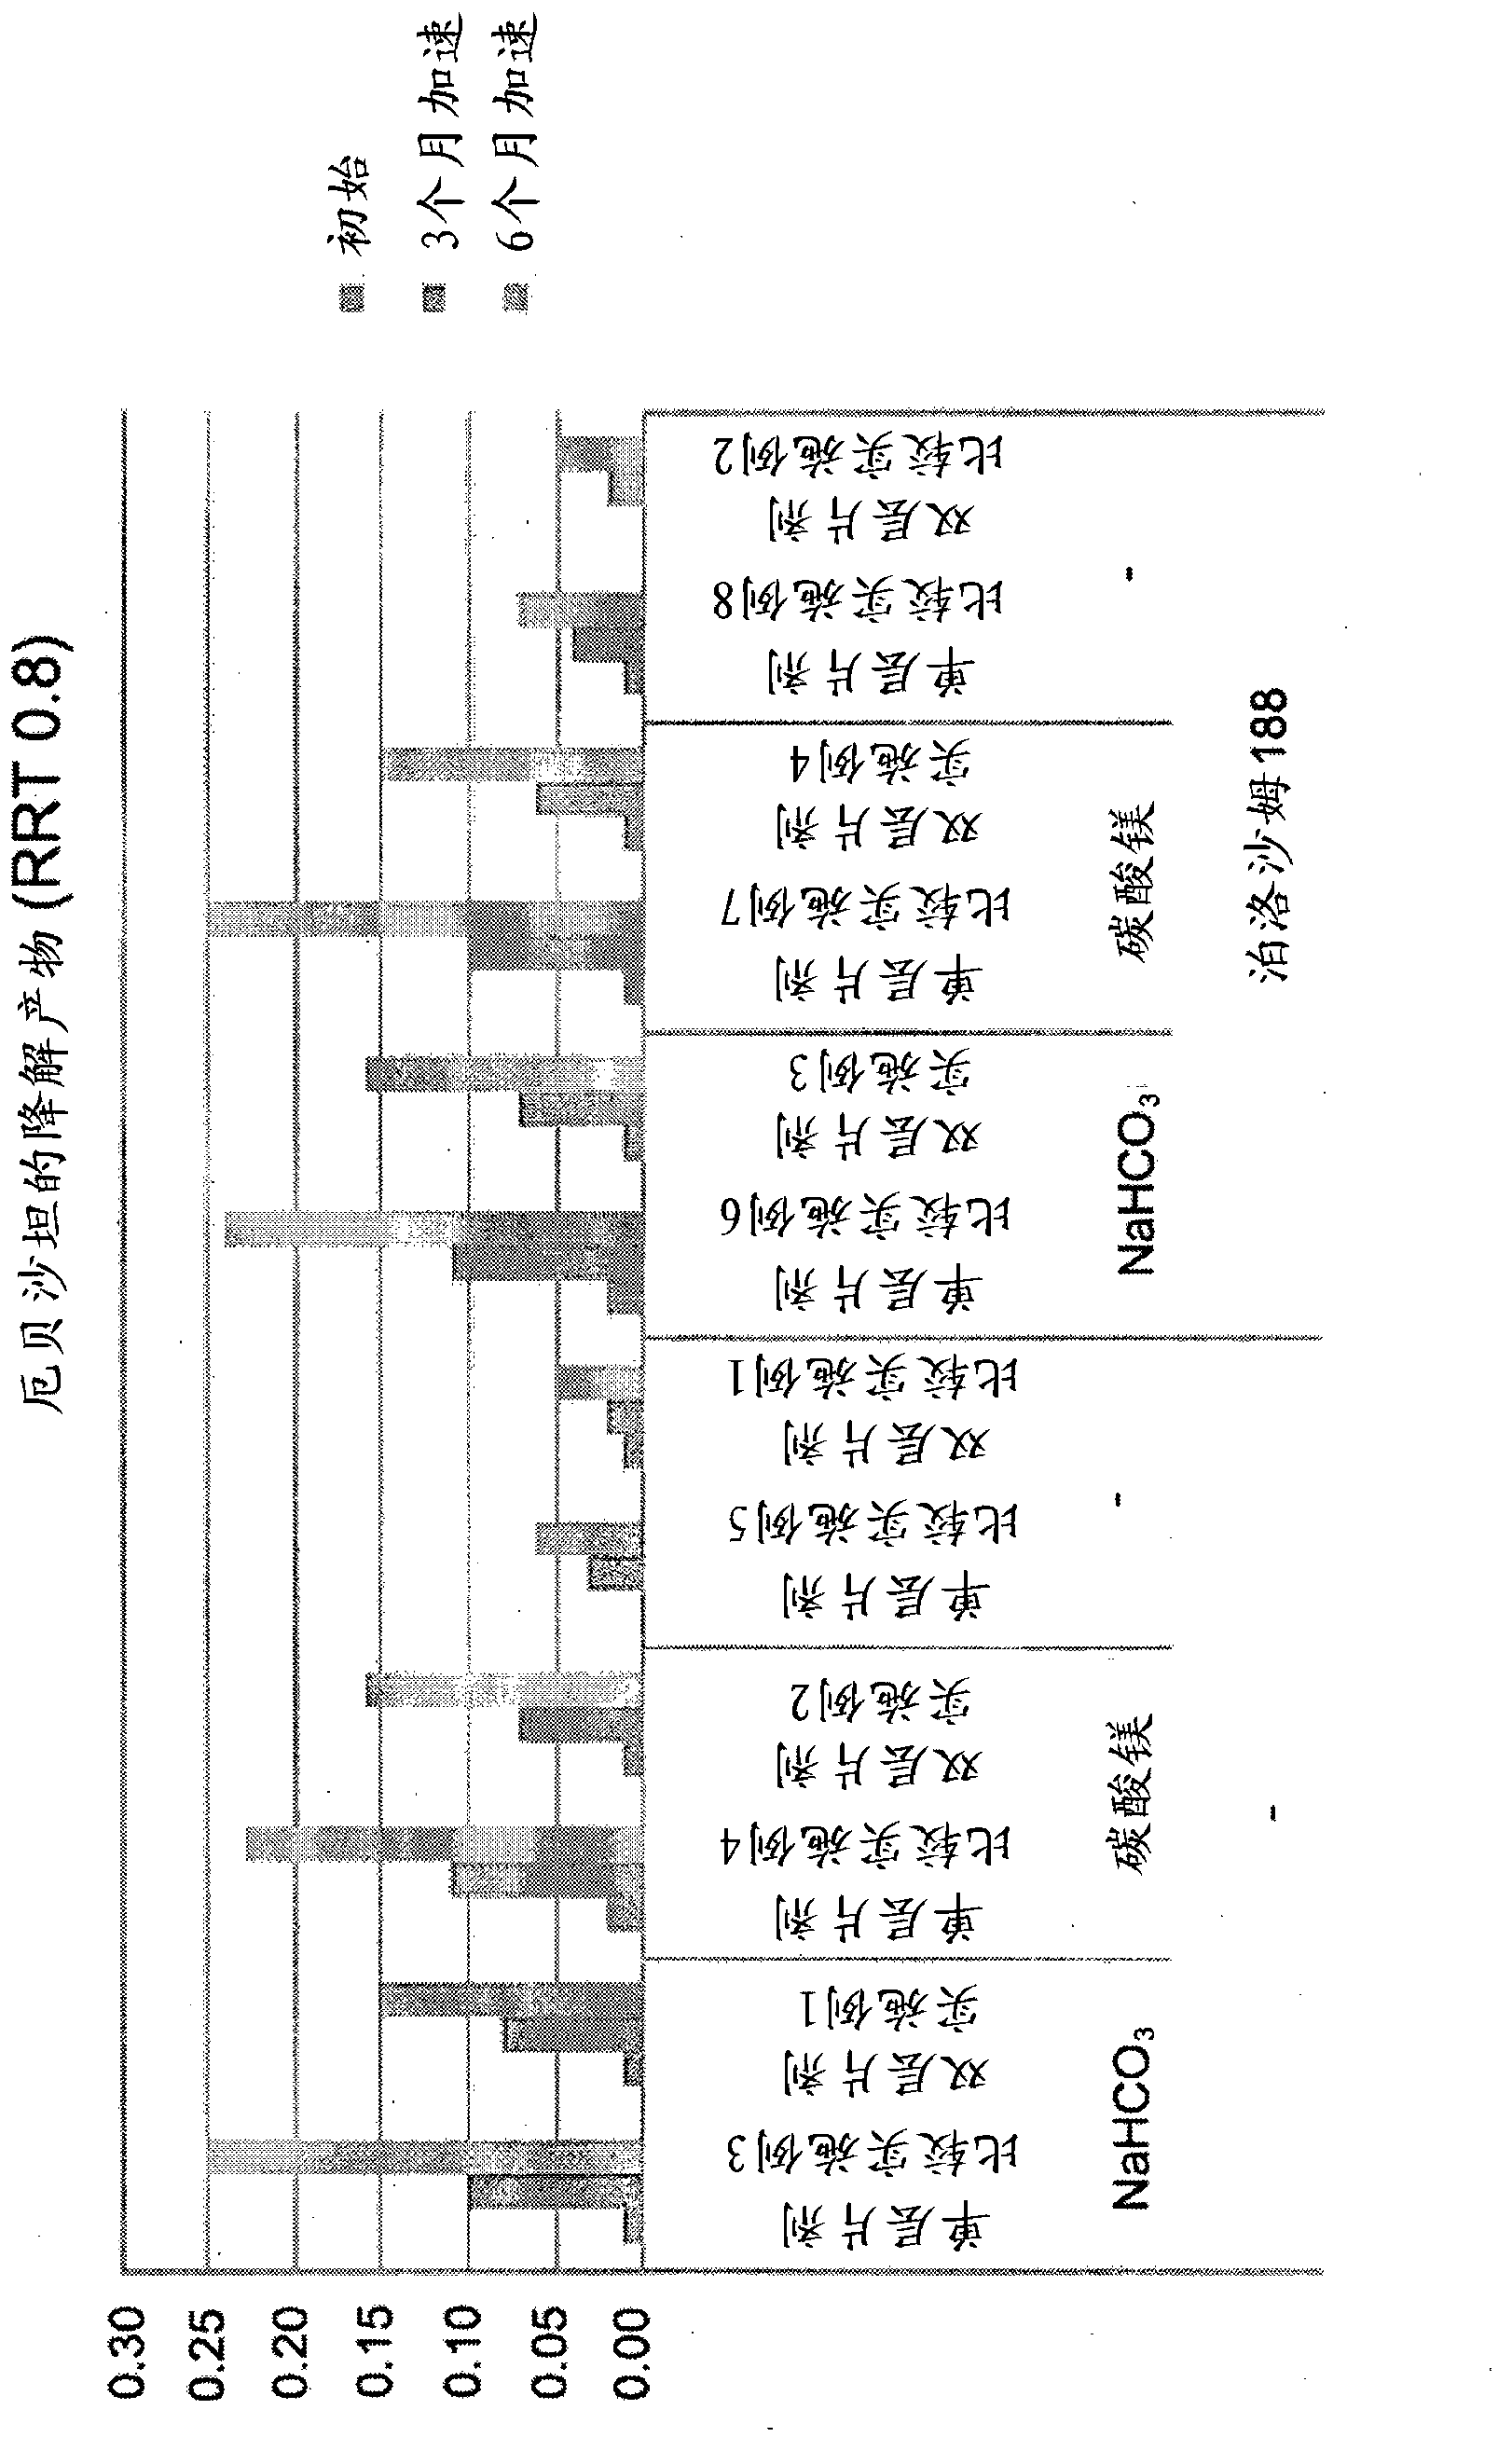 Pharmaceutical formulation in the form of bilayered tablets comprising HMG-CoA reductase inhibitor and irbesartan